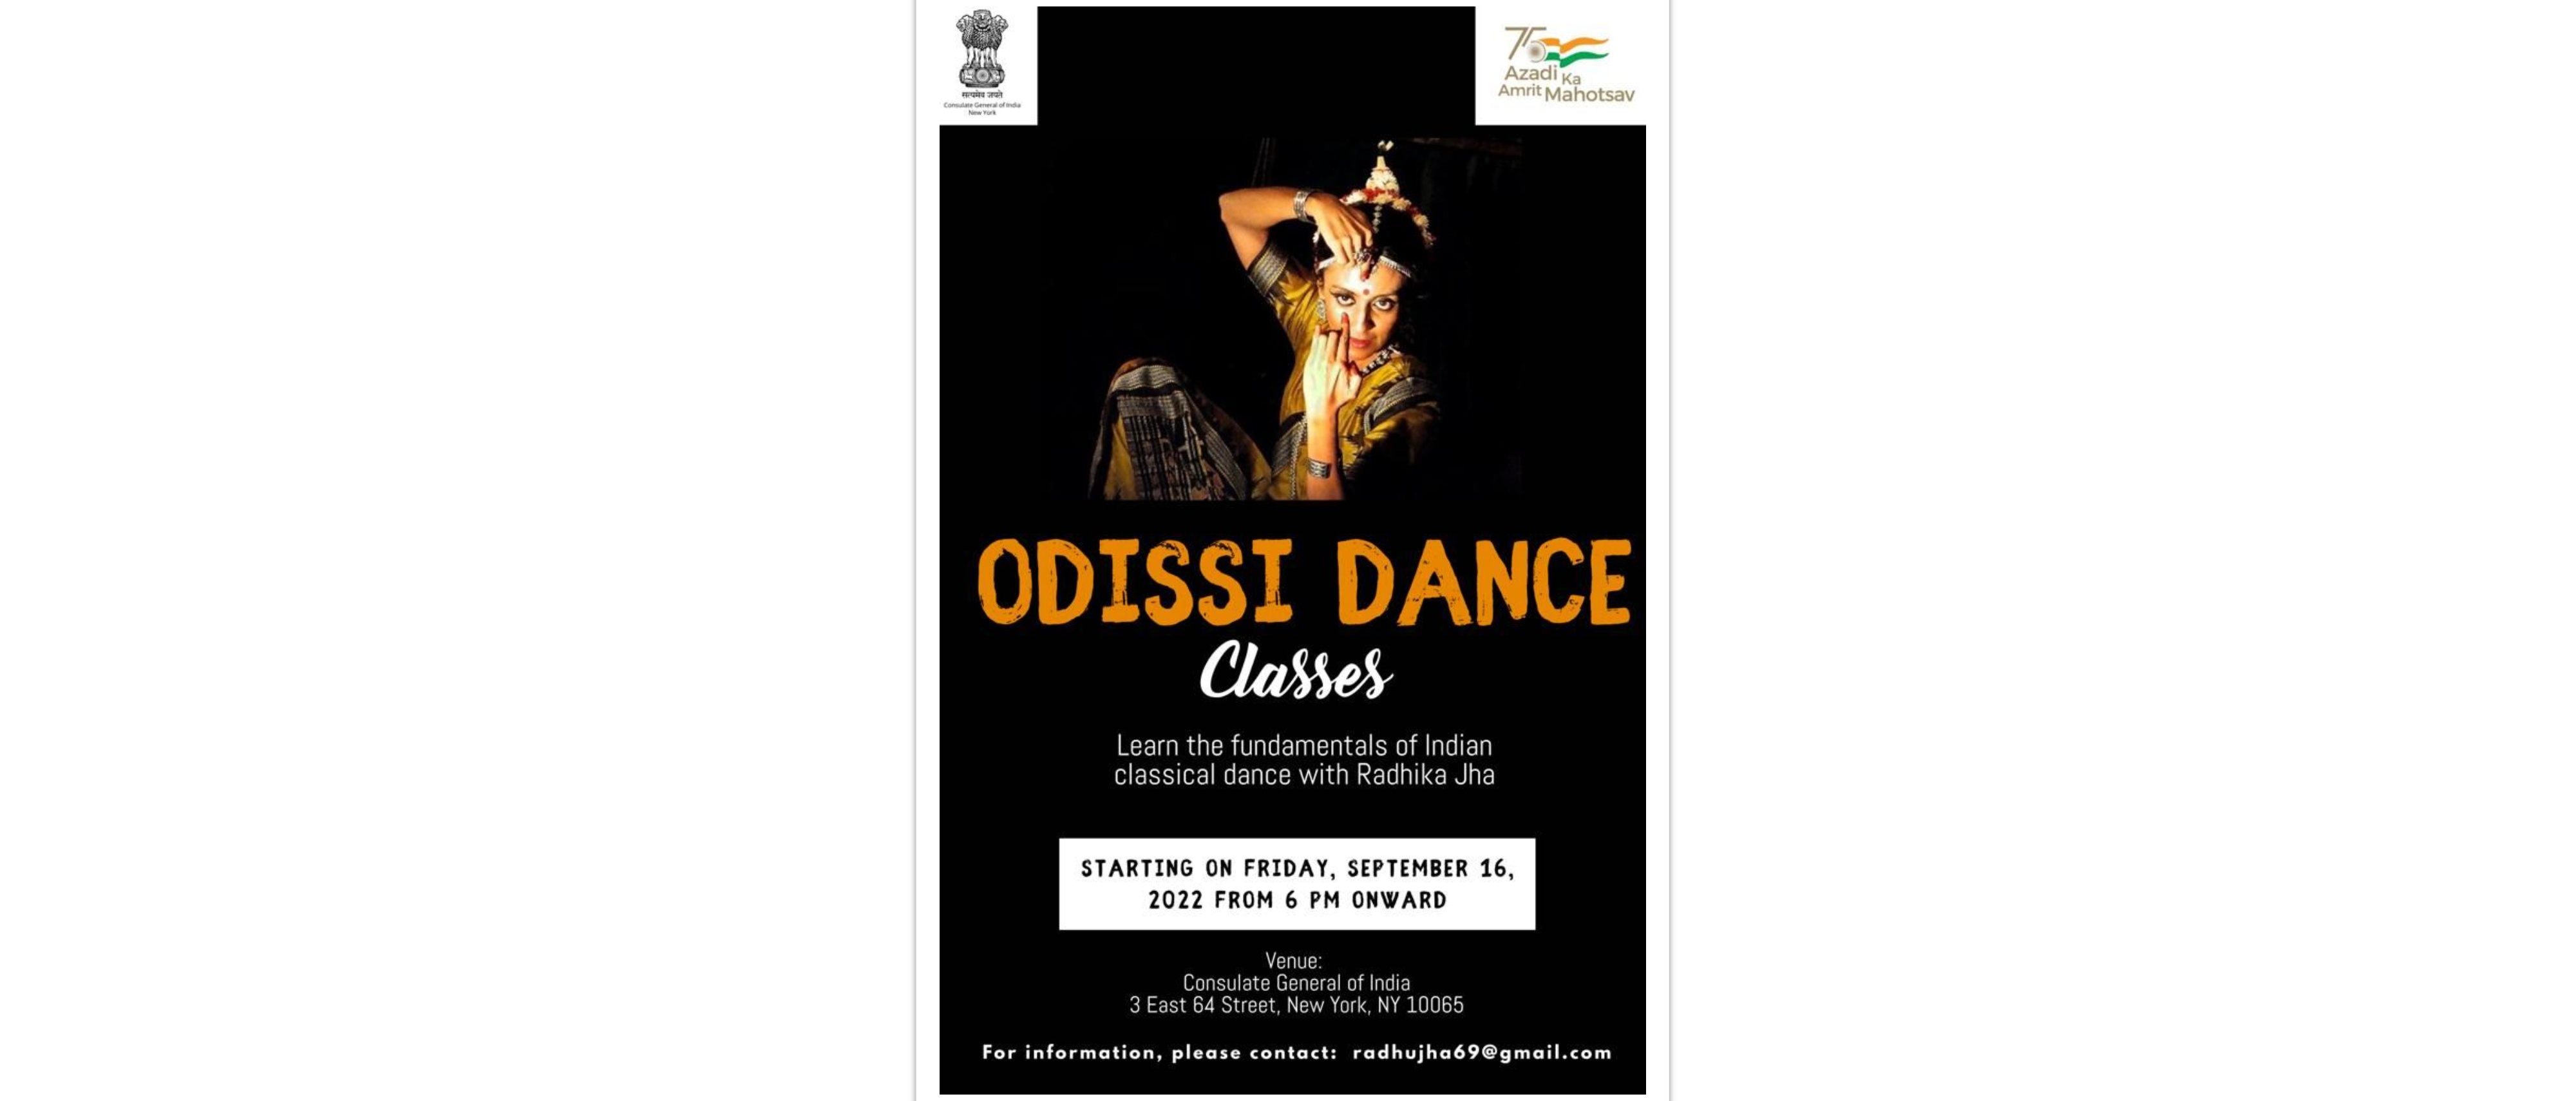  Learn the fundamentals of Indian Classical dance with eminent Odissi dancer Ms. Radhika Jha at Consulate General of India, New York.